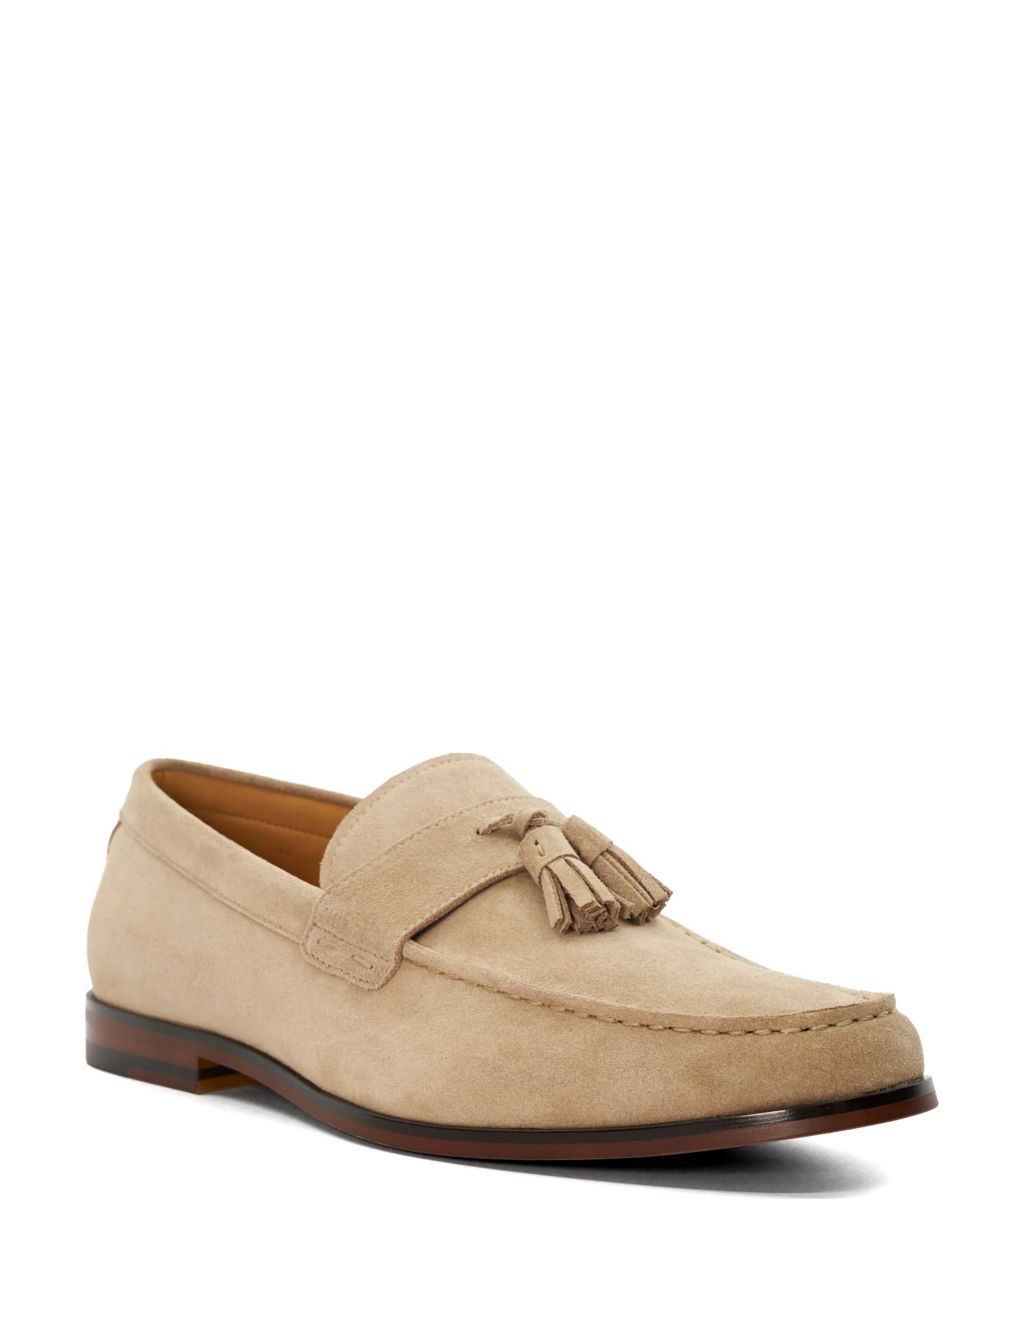 Suede Slip-On Loafers | Dune London | M&S